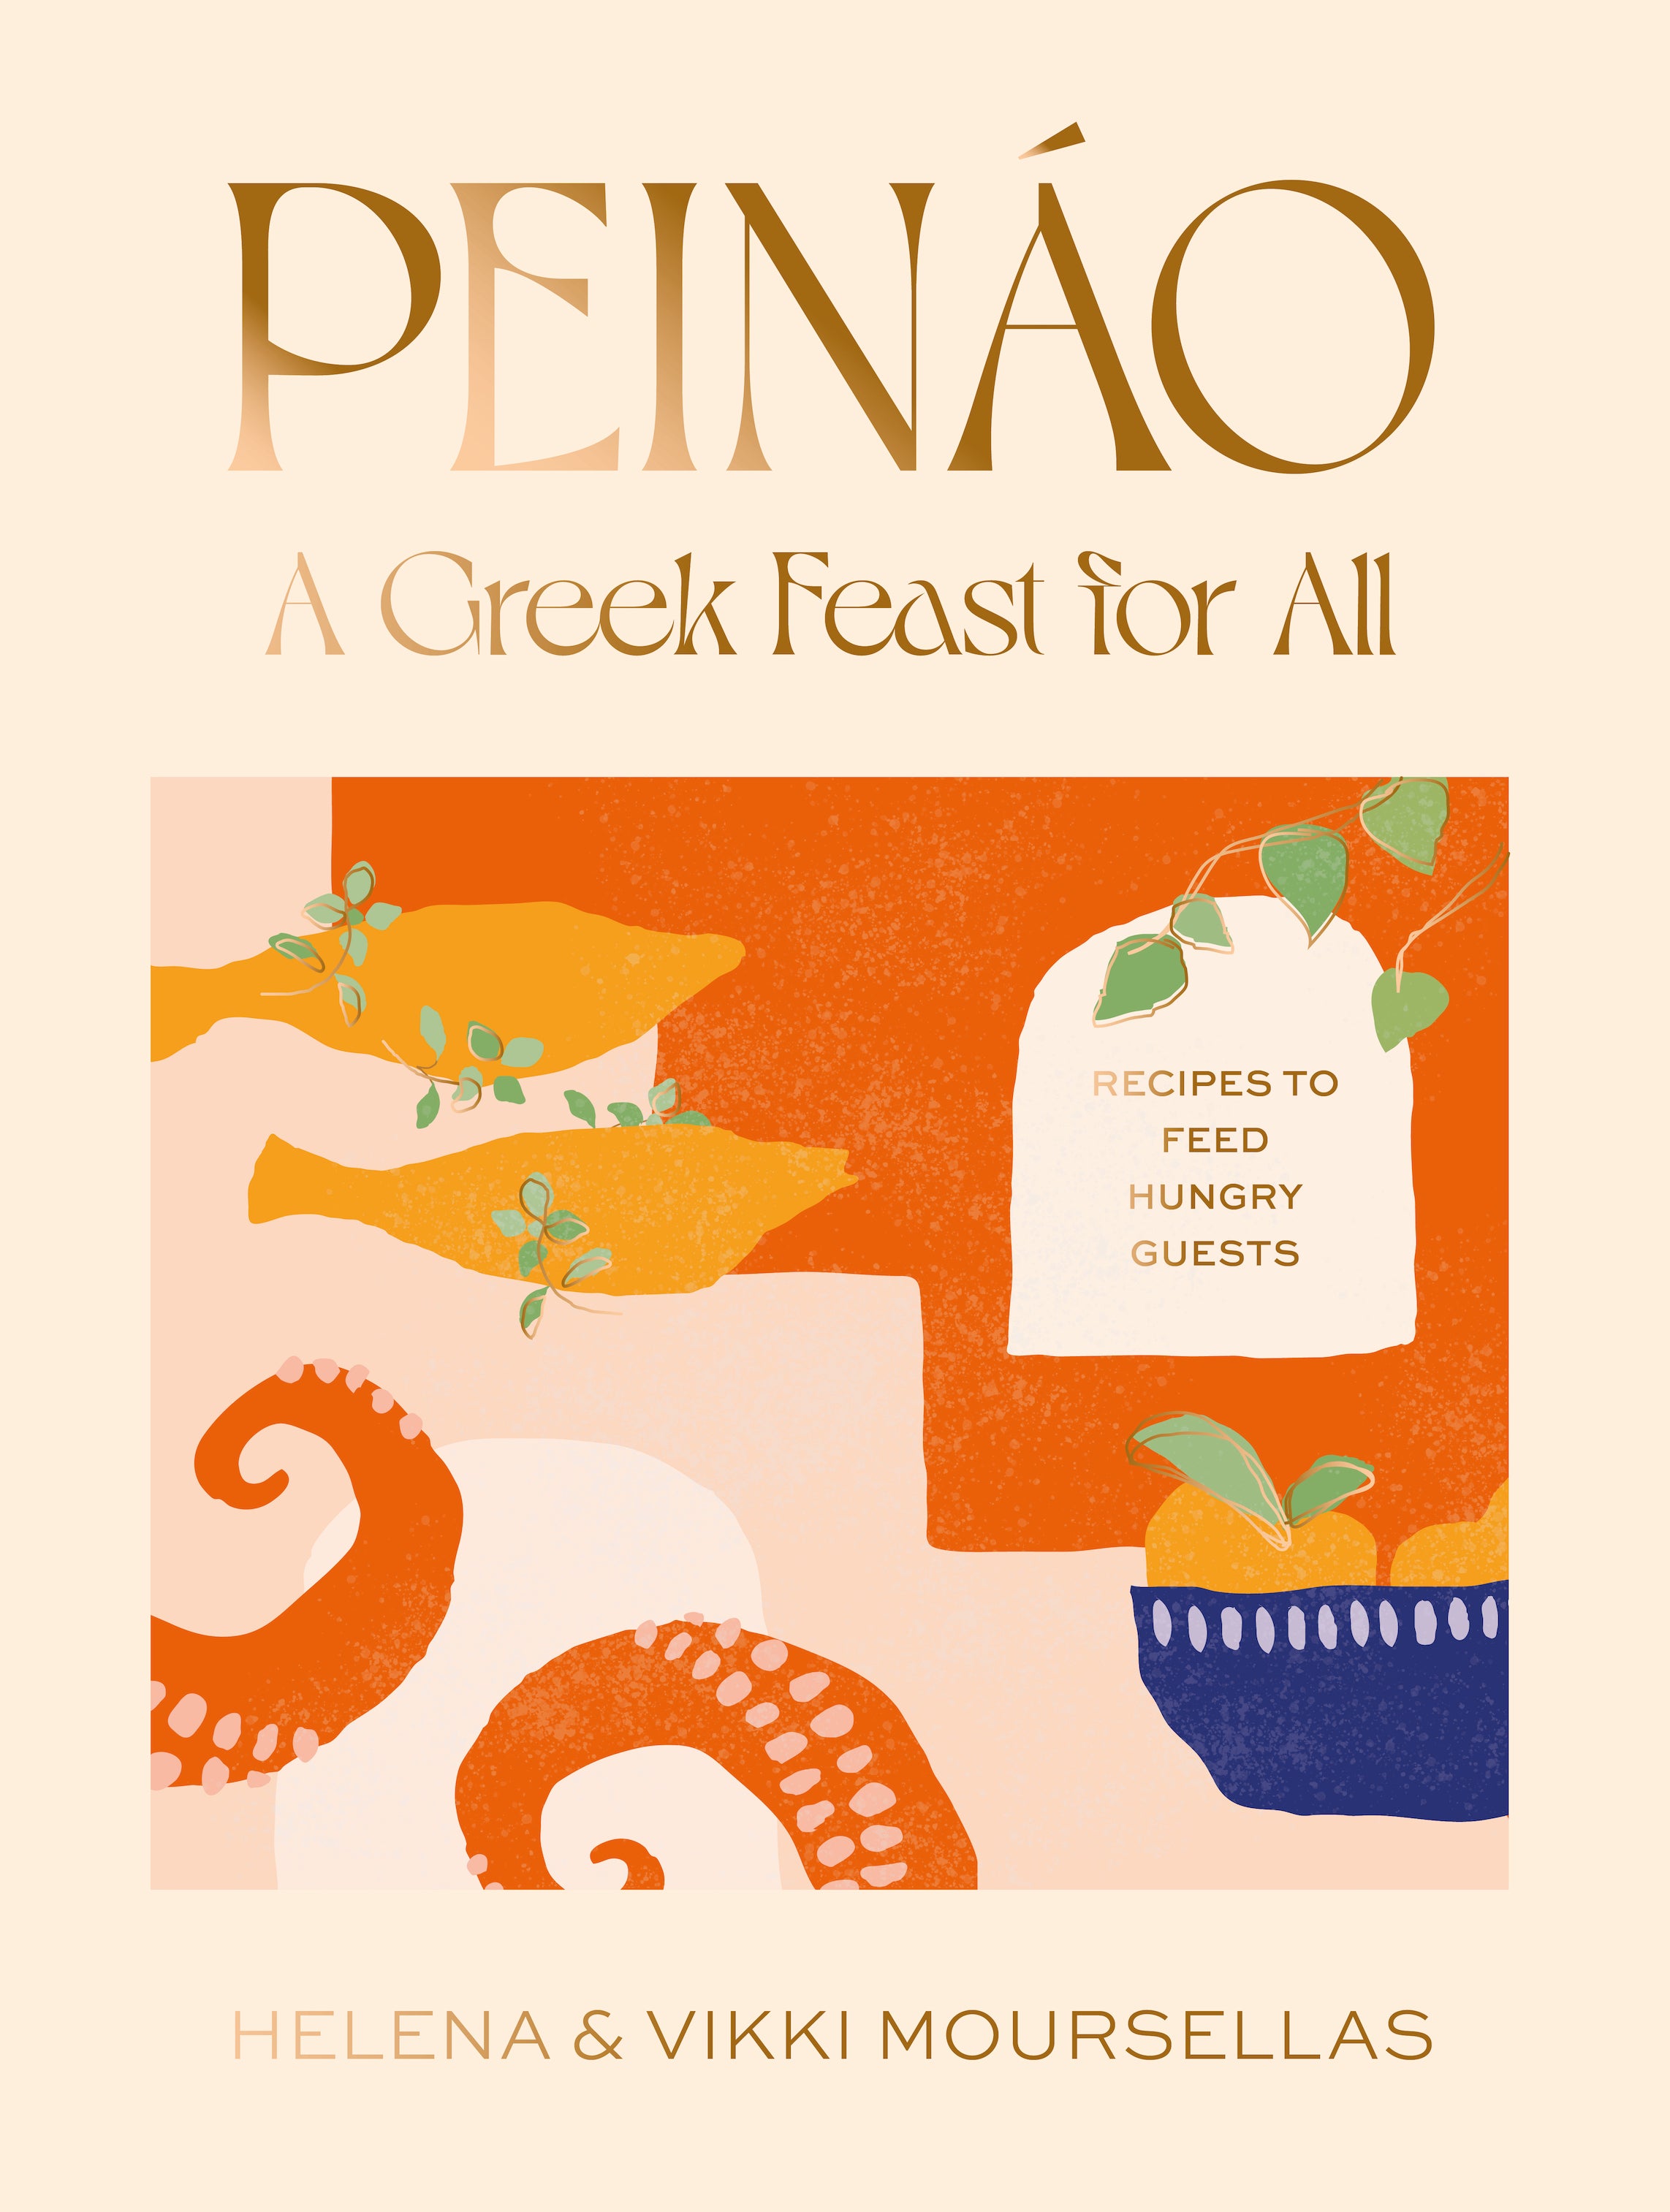 Book cover of Peinao: a Greek Feast for all in gold lettering with an image of fish, octopus and citrus in a bowl.